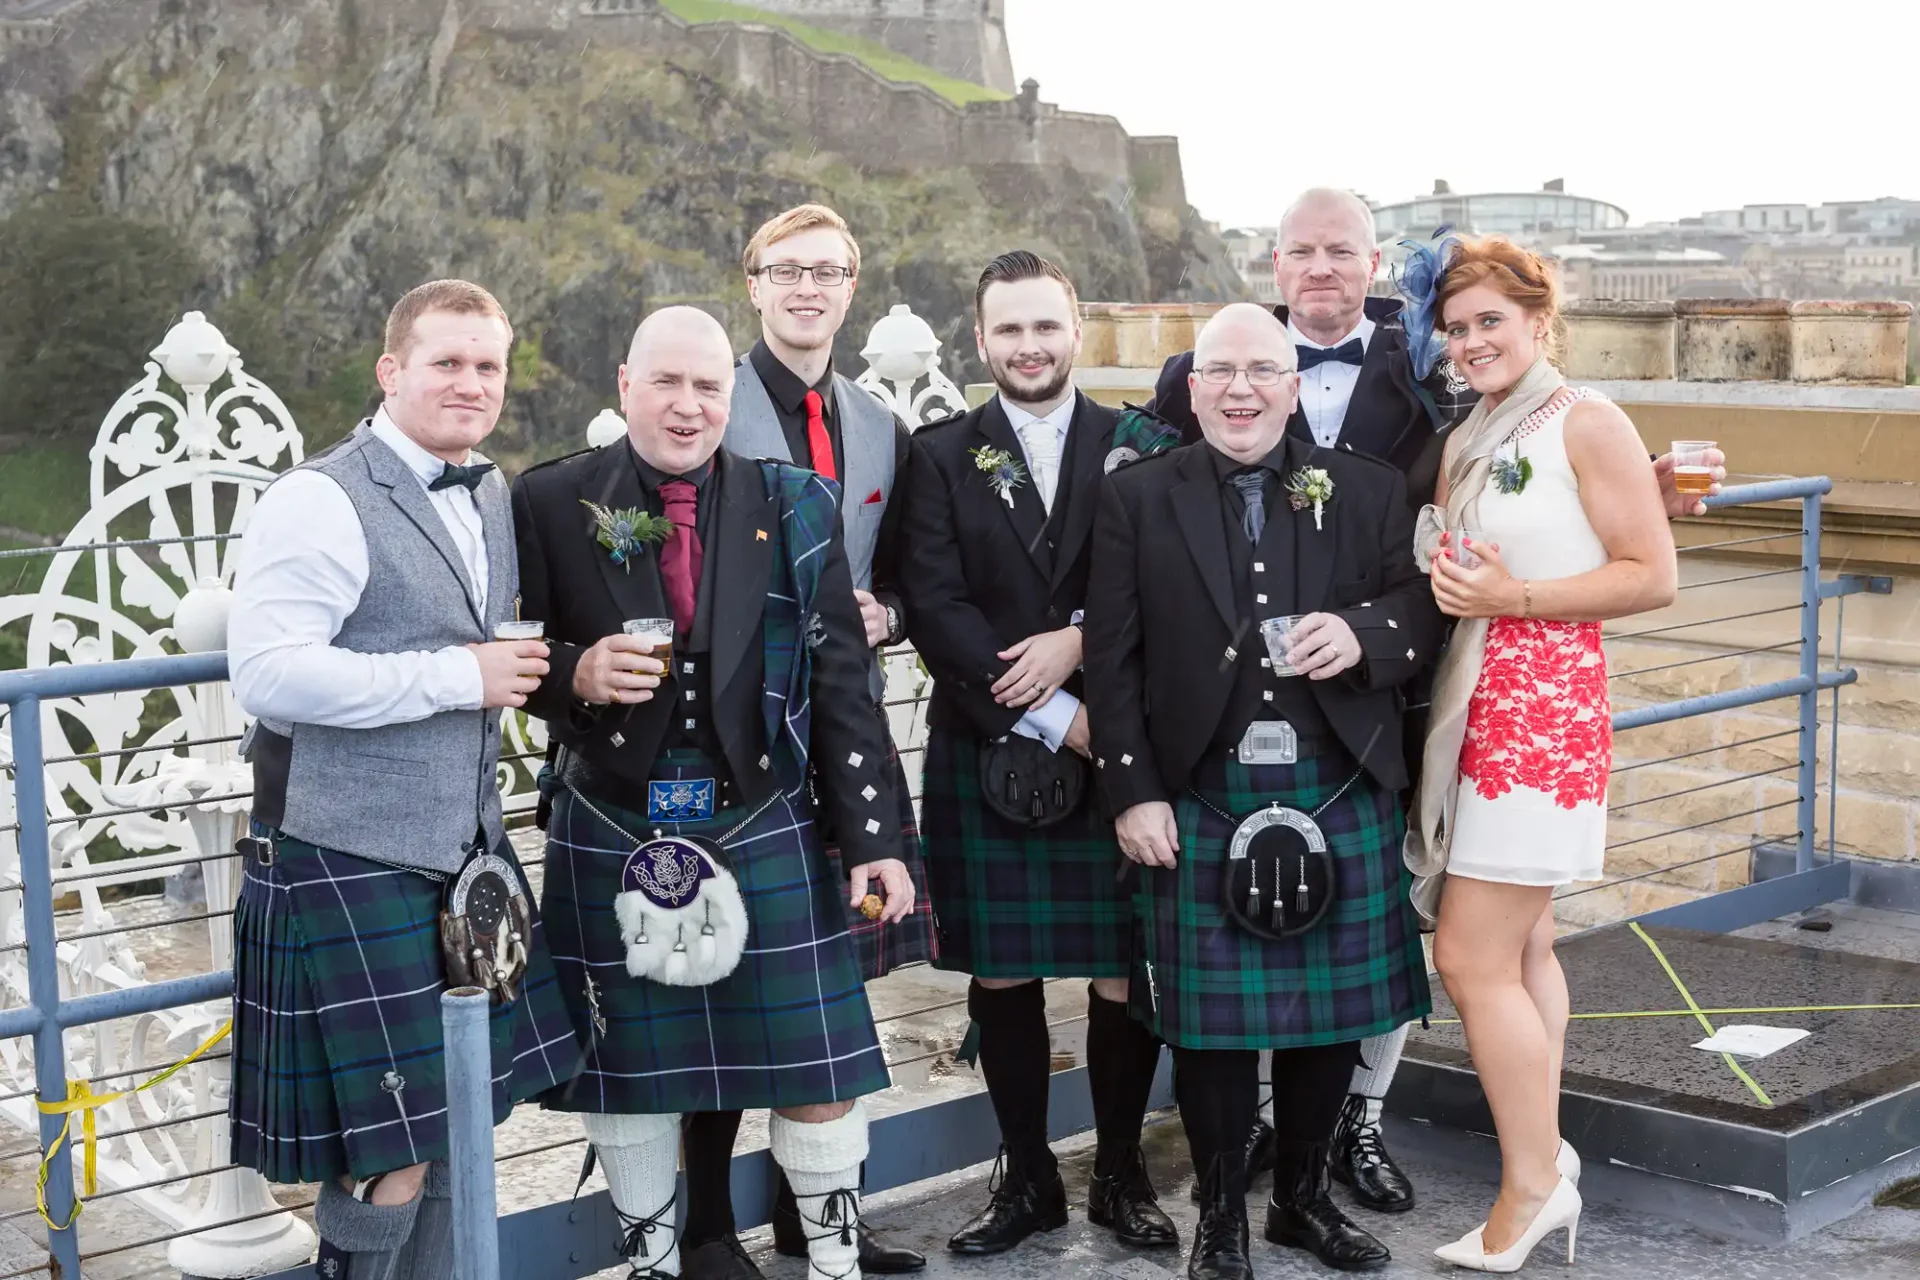 Group of seven people, some in kilts, holding drinks and smiling on a terrace with a cityscape background.